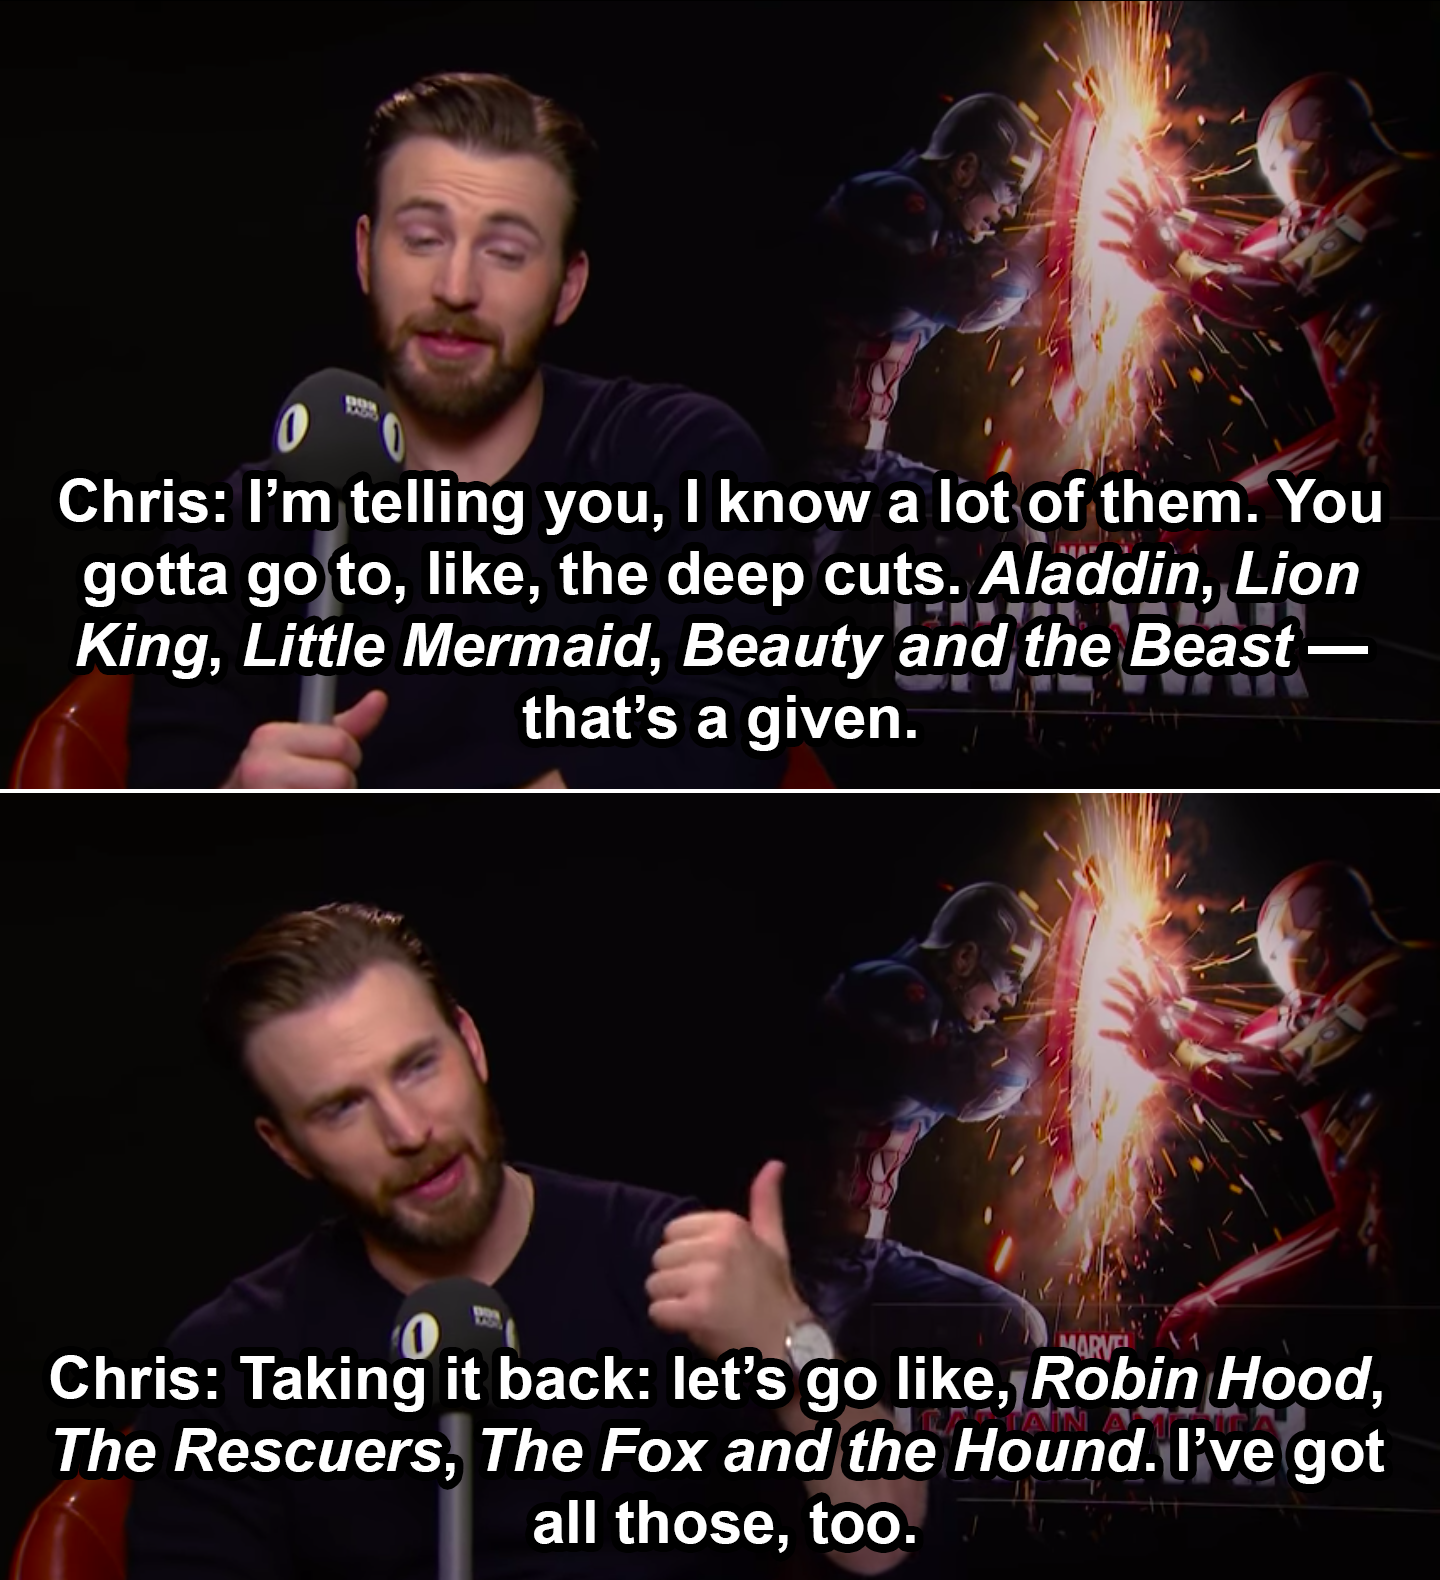 Chris Evans saying, &quot;I know a lot of them, You gotta go to, like, the deep cuts, taking it back, let&#x27;s go like, Robin Hood, The Rescuers, The Fox and the Hound&quot;